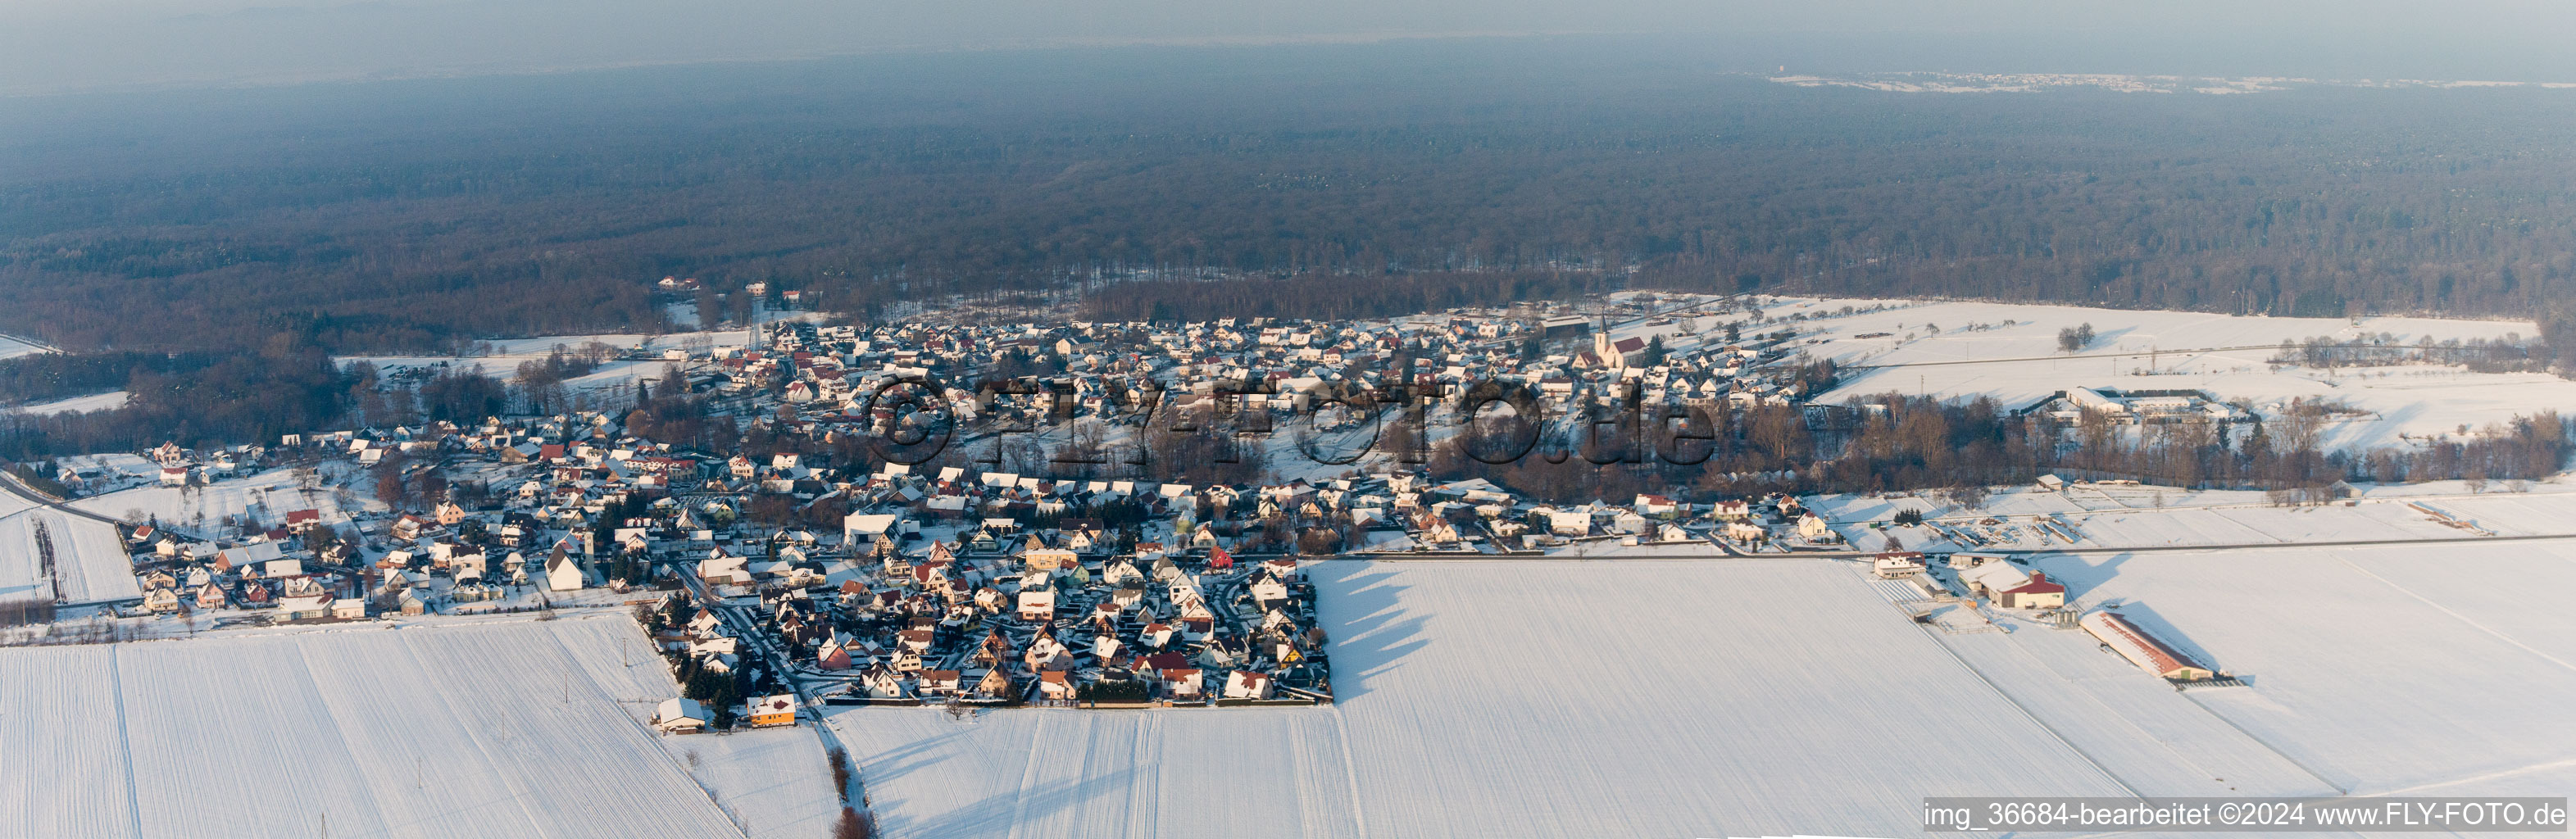 Wintry snowy Village - view on the edge of agricultural fields and farmland in Scheibenhard in Grand Est, France